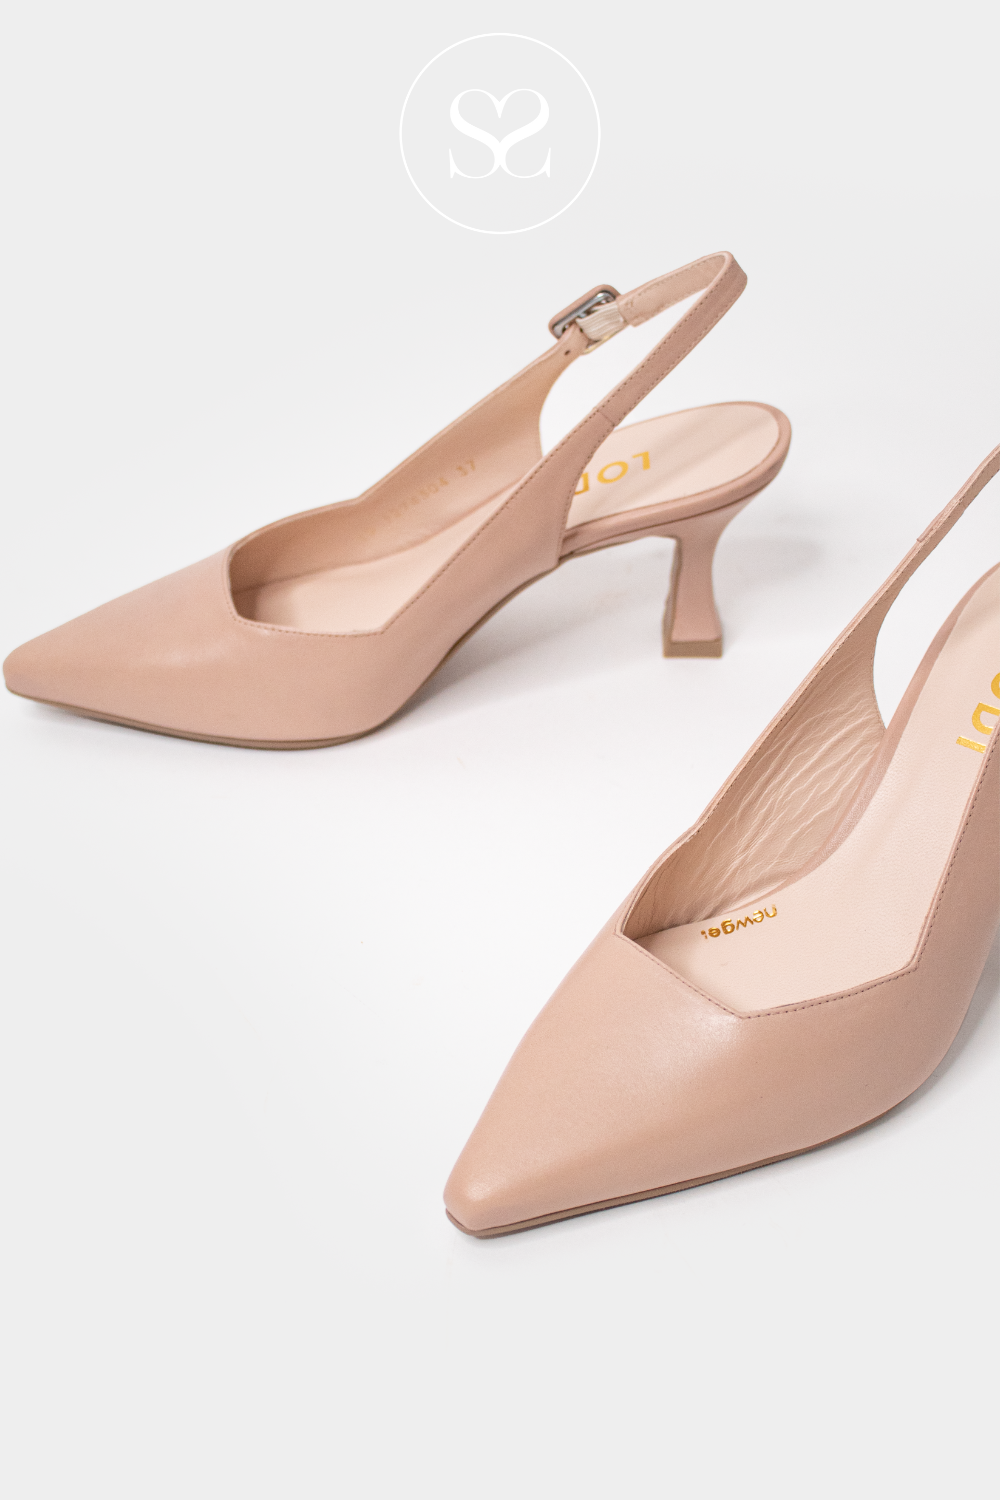 MID HEEL SHOES FROM LODI IN SOFT NUDE LEATHER